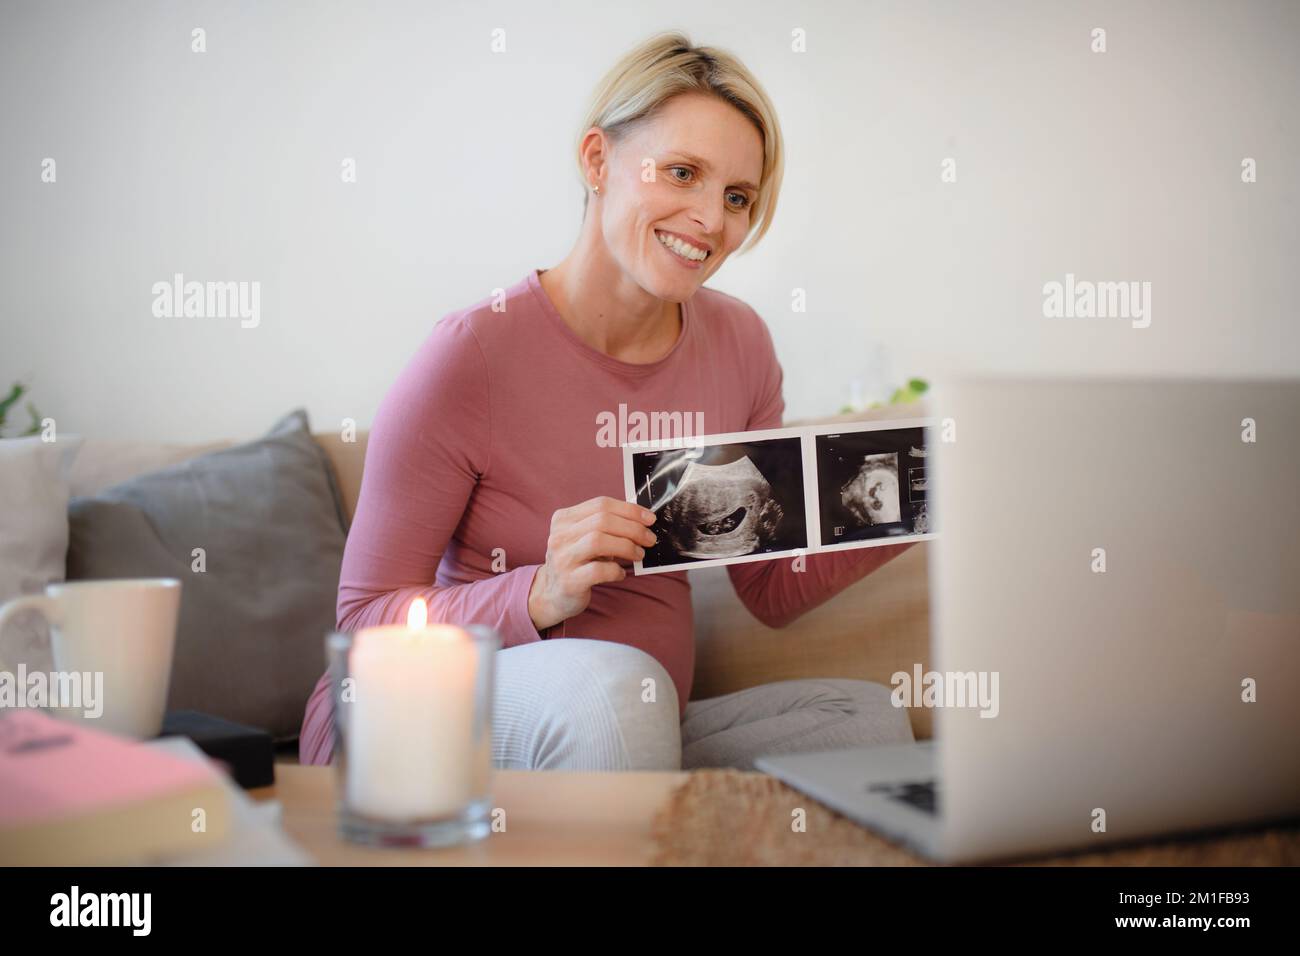 Pregnant woman showing ultrasound photo of her baby to webcam. Stock Photo